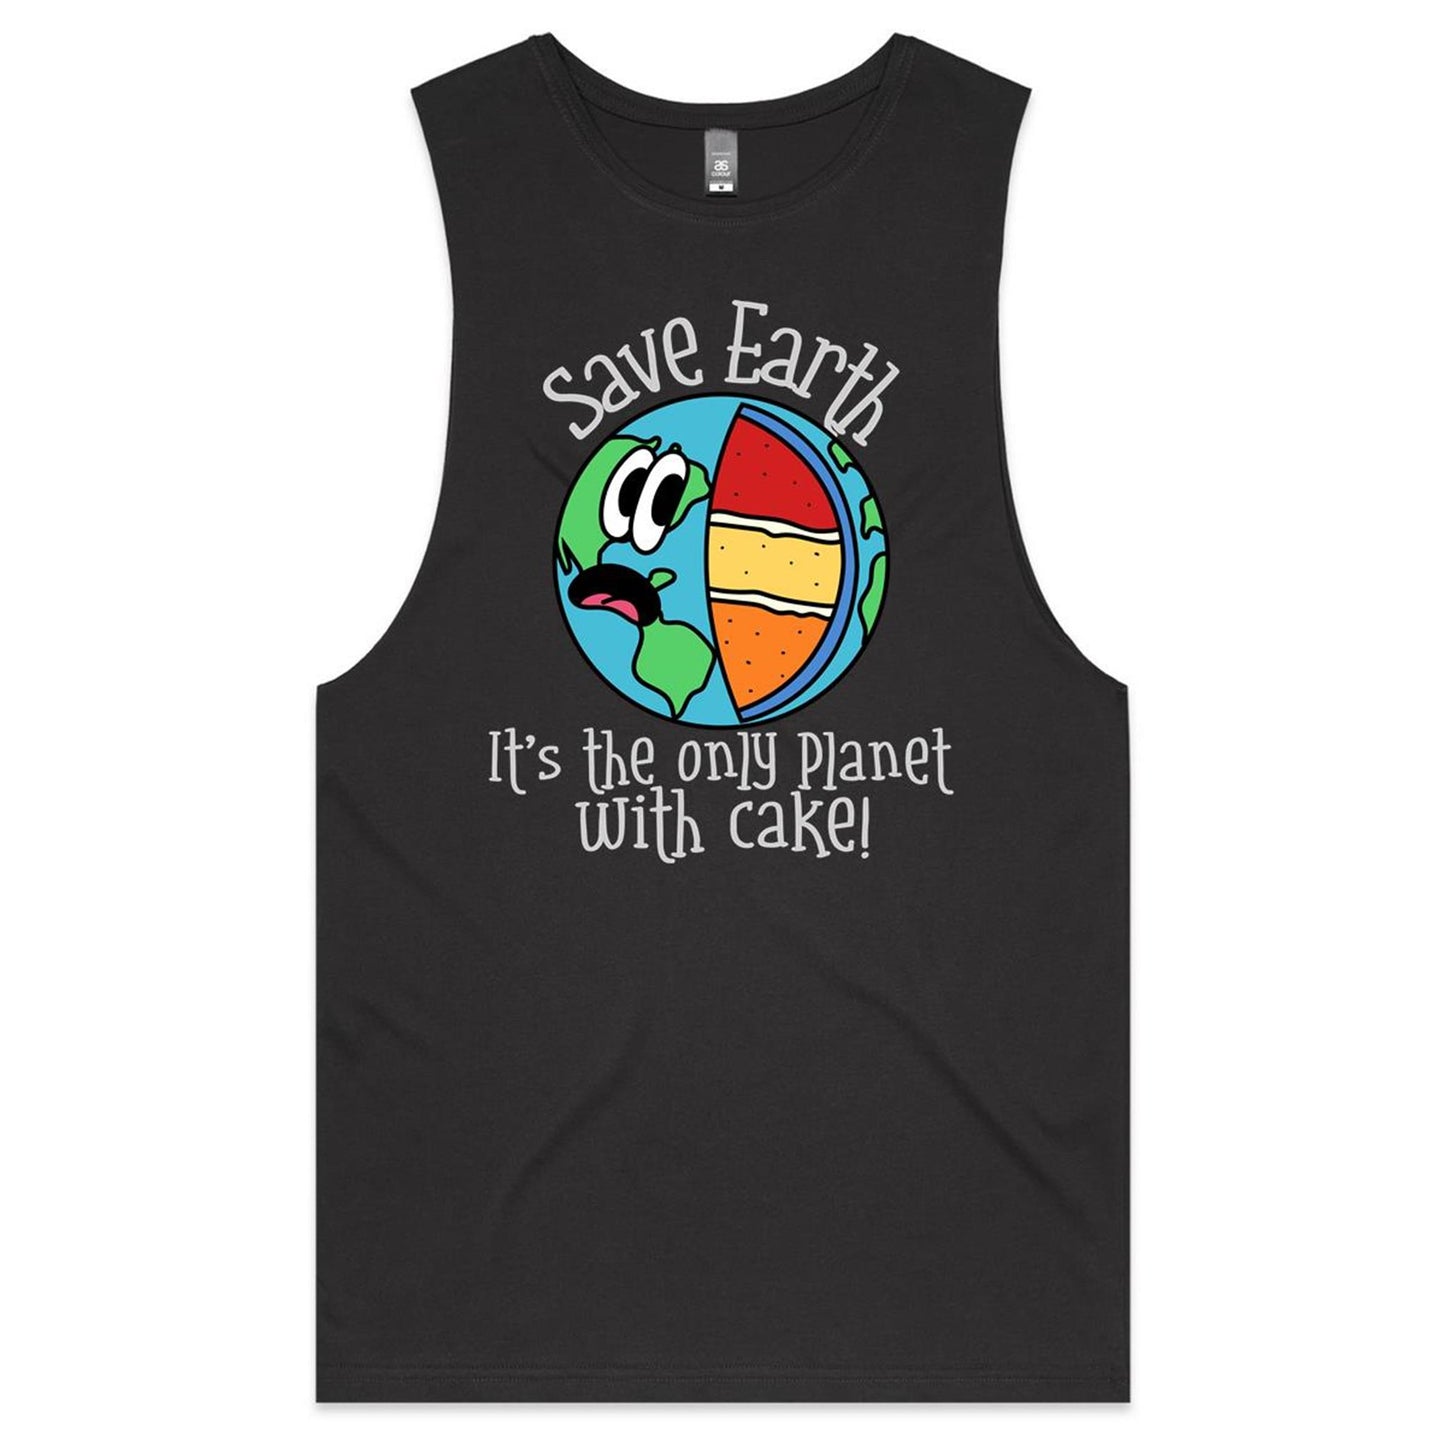 Save Earth, It's The Only Planet With Cake - Mens Tank Top Tee Coal Mens Tank Tee